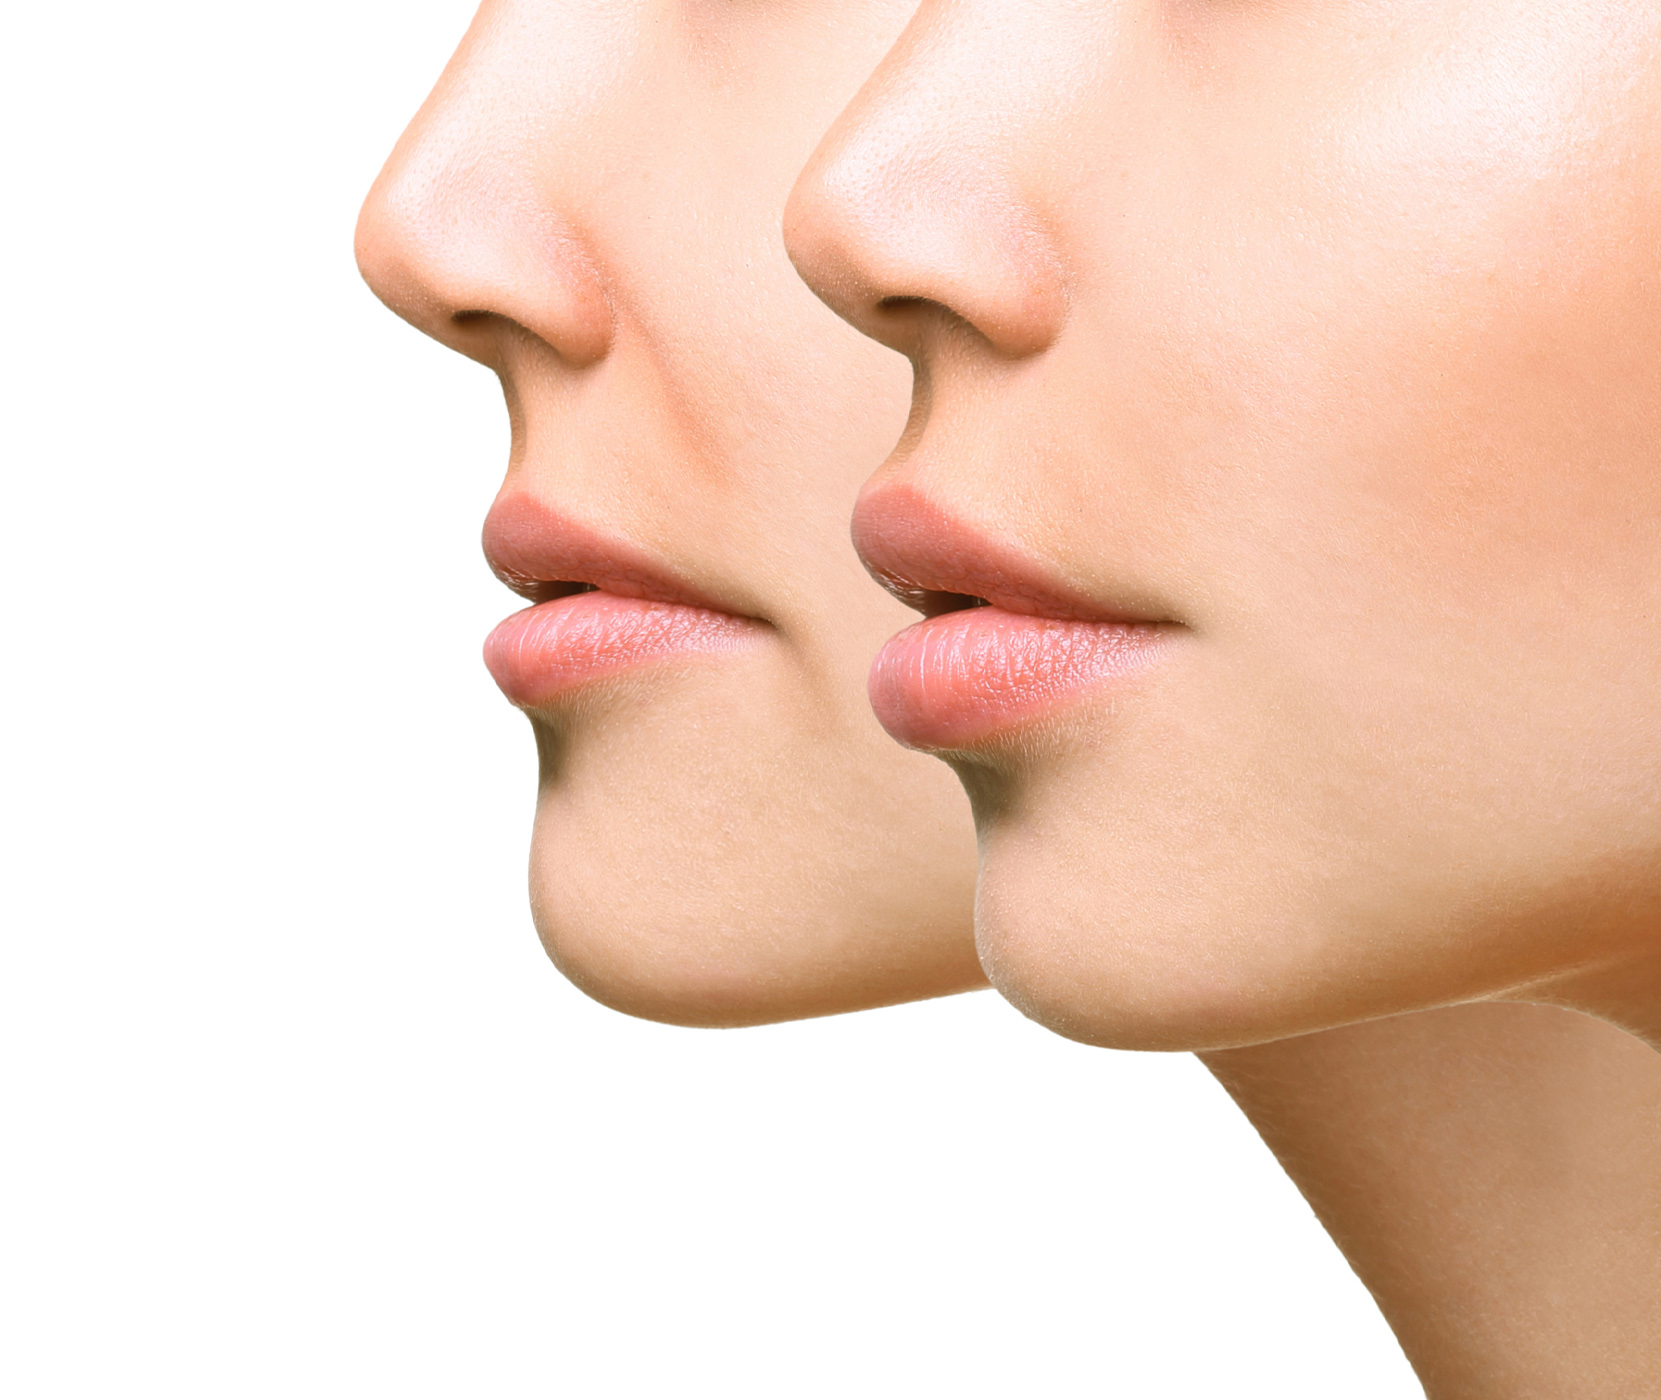 two Women's chins side by side